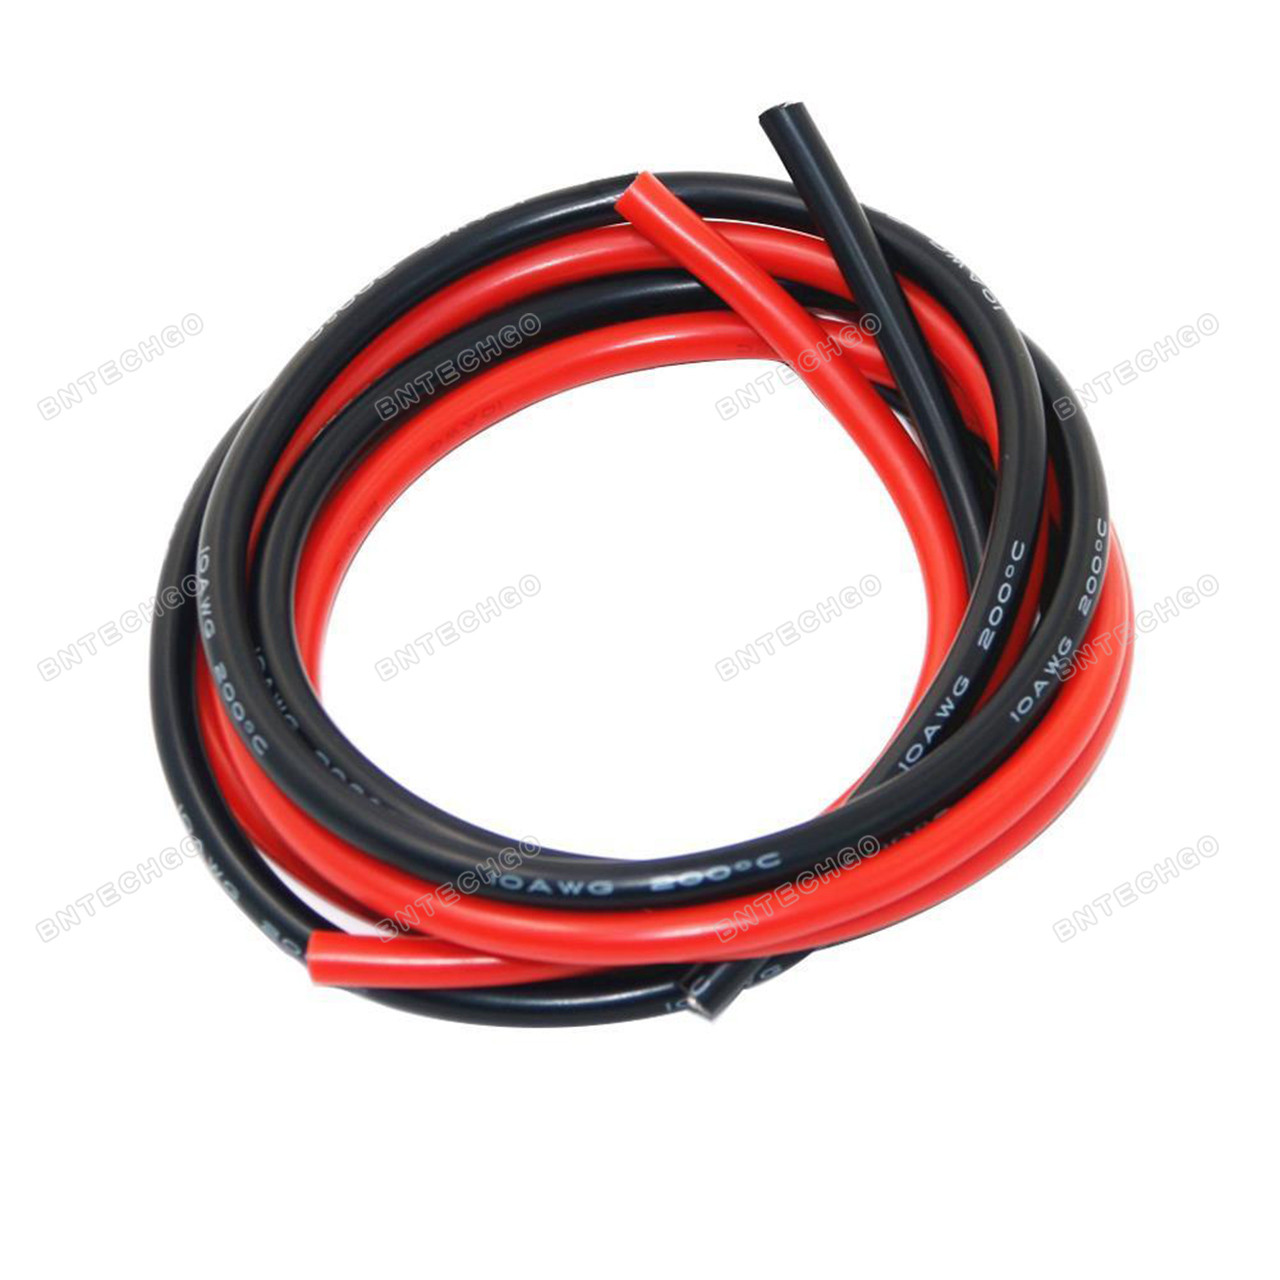 Electrical Wire 18 AWG 18 Gauge Silicone Wire Hook Up Wire Cable 20 Feet 10 Ft Black And 10 Ft Red - Soft And Flexible 150 Strands 008mm Of Tinned